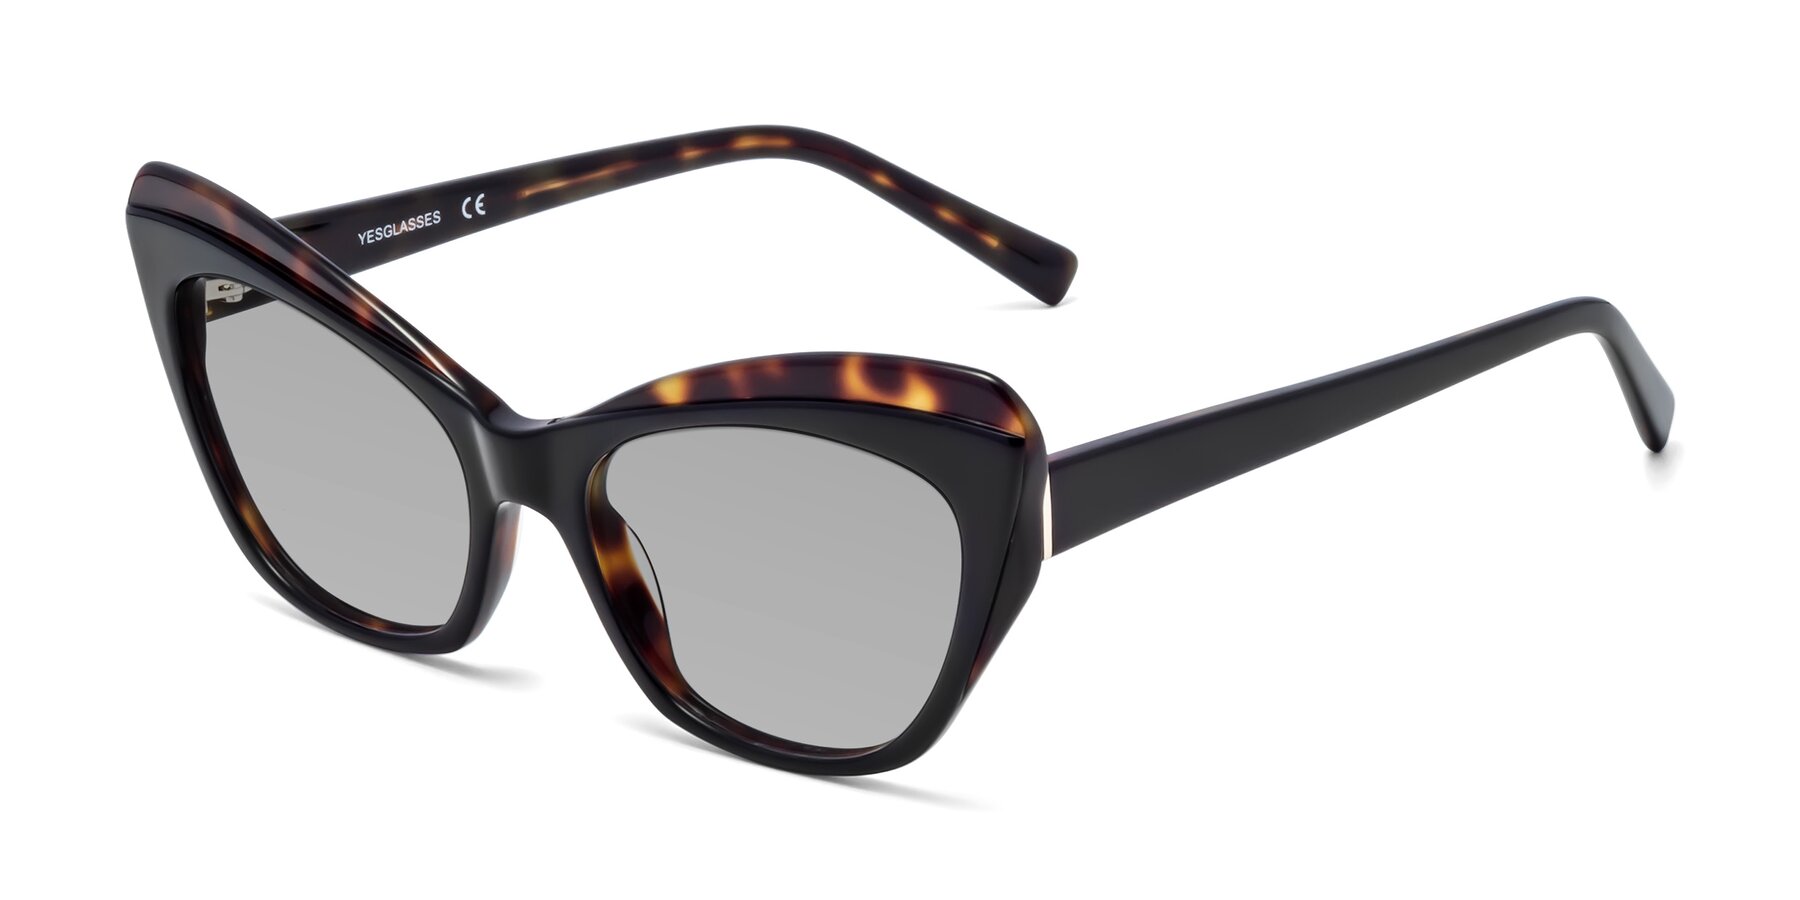 Angle of 1469 in Black-Tortoise with Light Gray Tinted Lenses